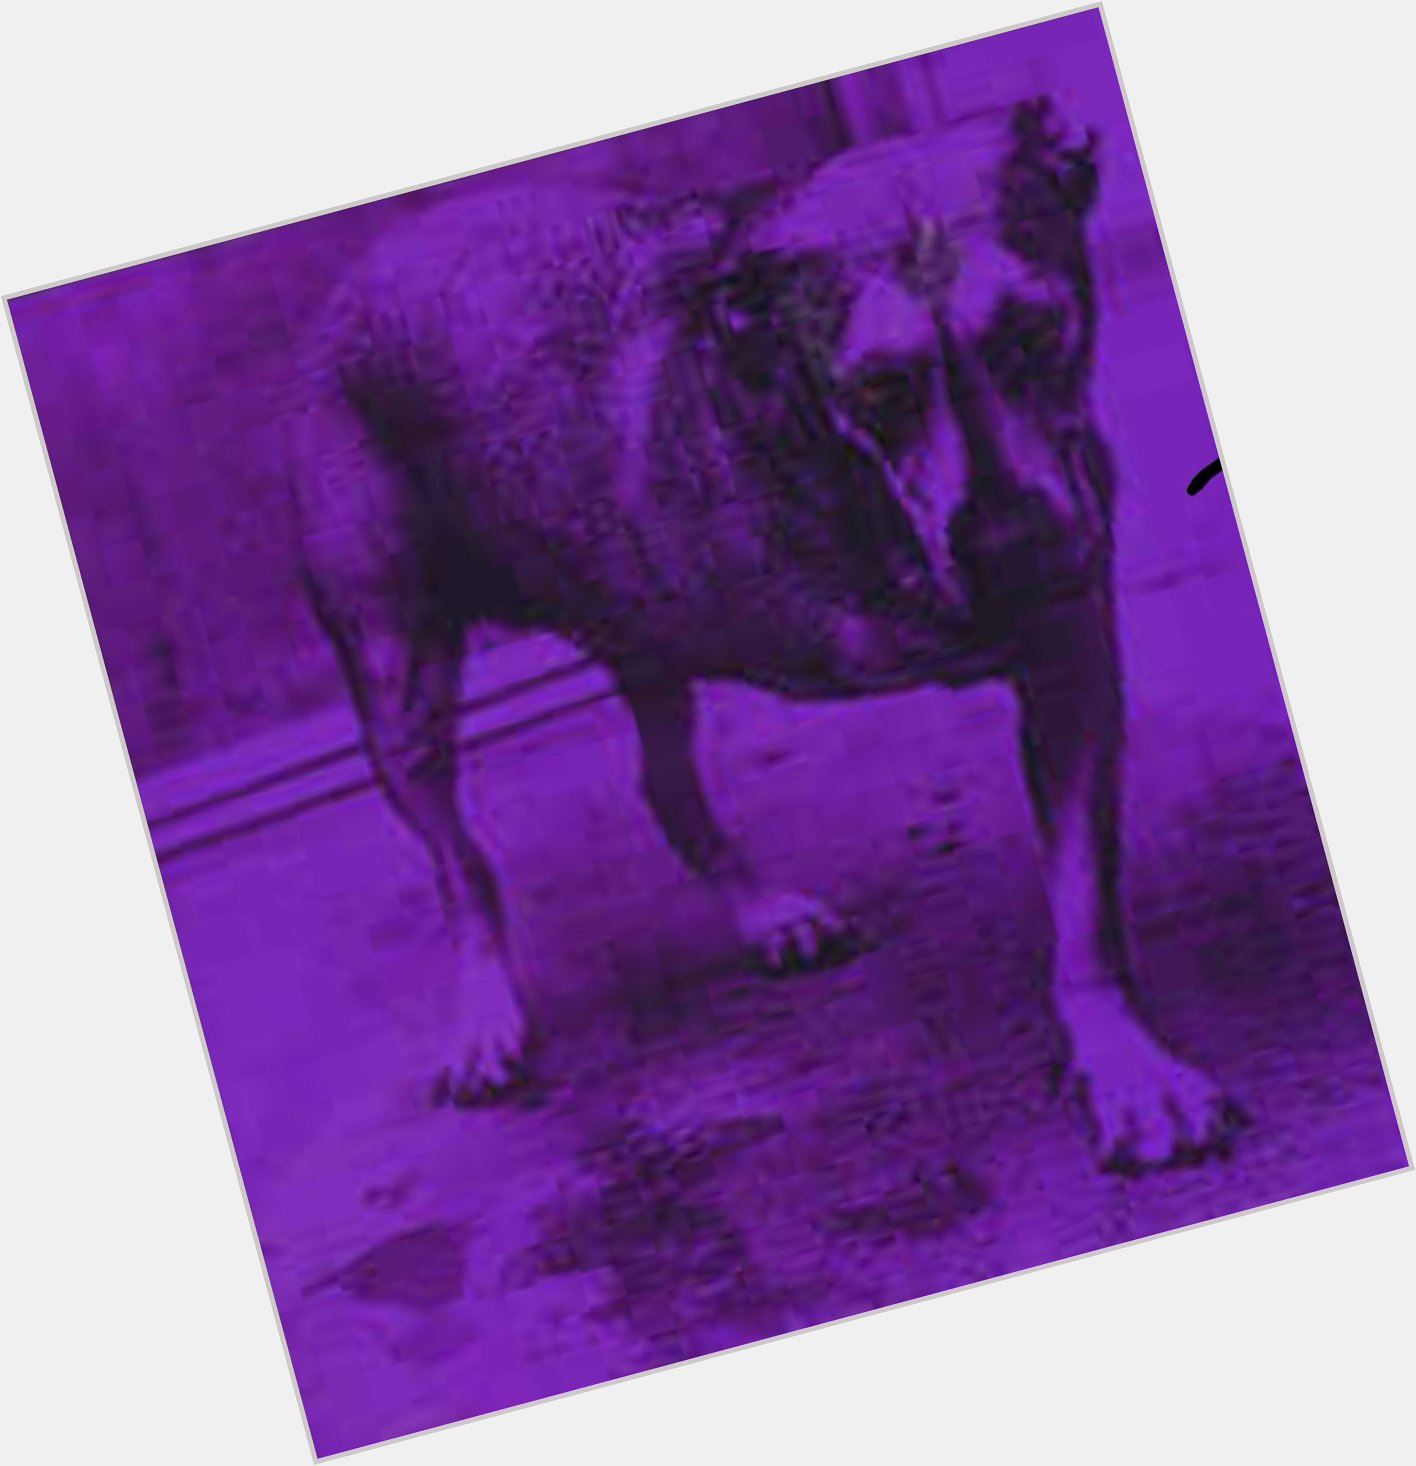 Alice In Chains Grind from the self titled 3 legged dog album. Happy Birthday to my old friend Jerry Cantrell 